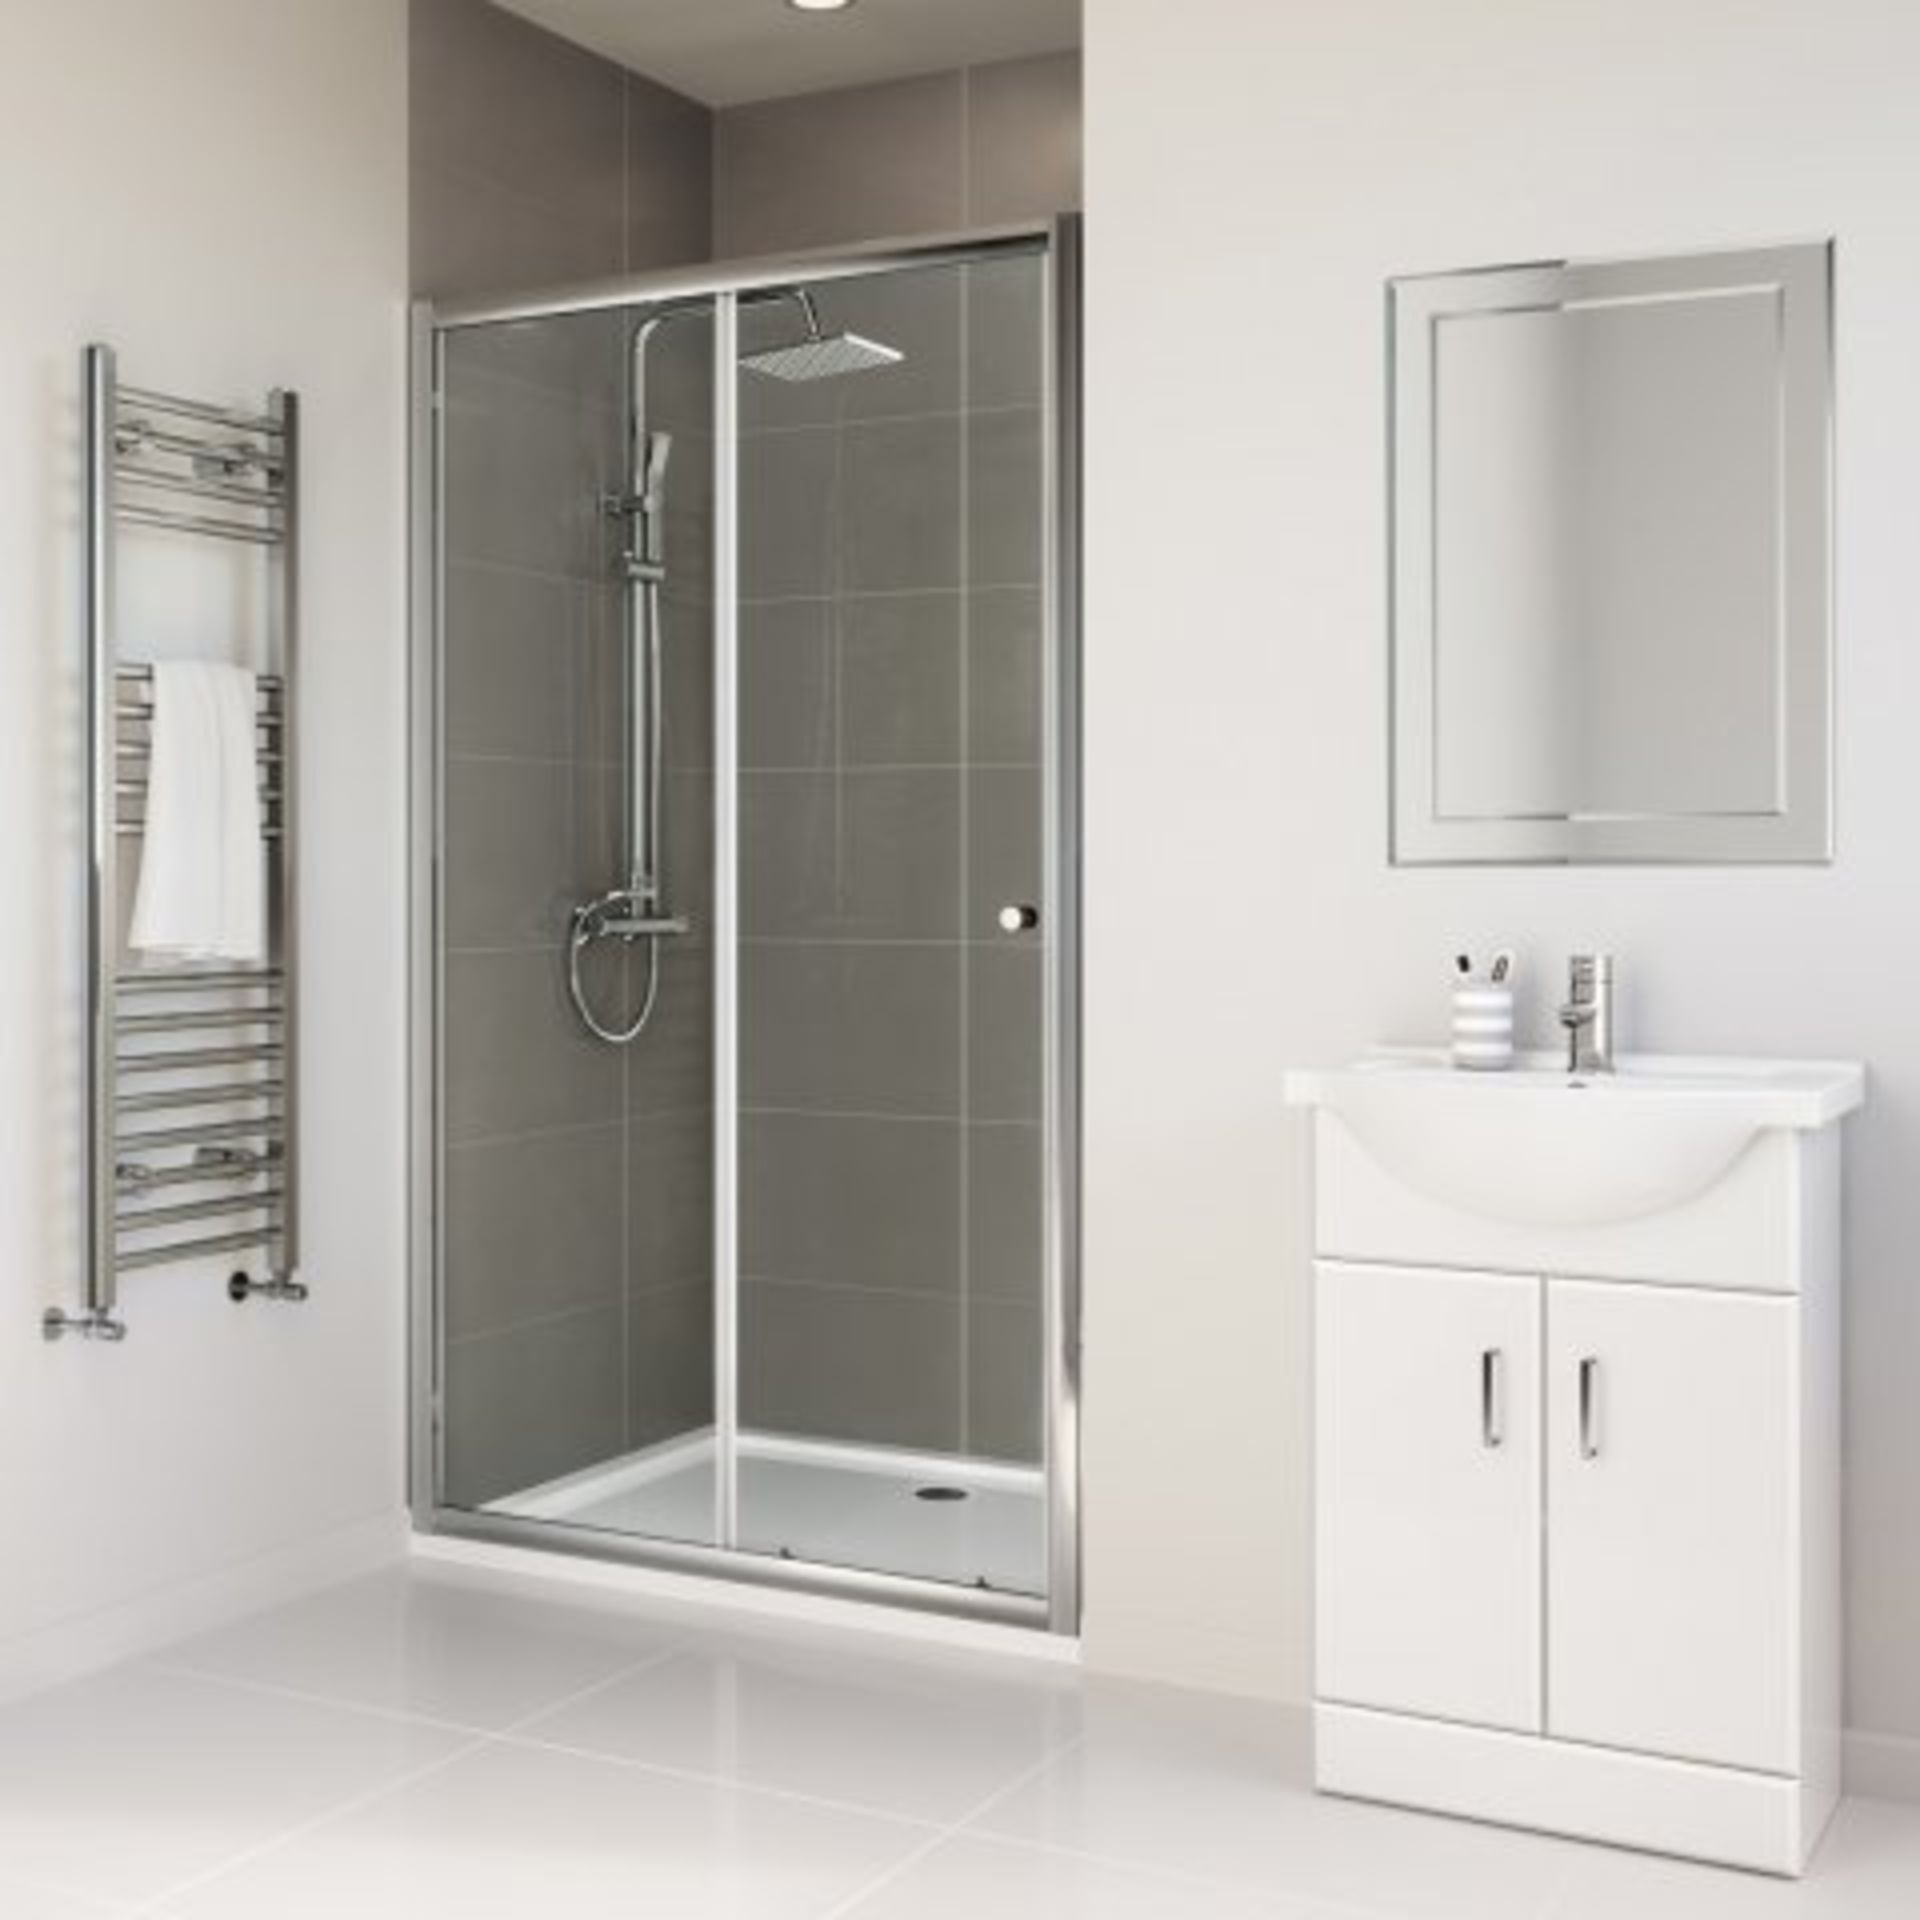 (N116) 1200mm - Elements Sliding Shower Door. RRP £299.99. Designed and crafted to improve the decor - Image 3 of 5